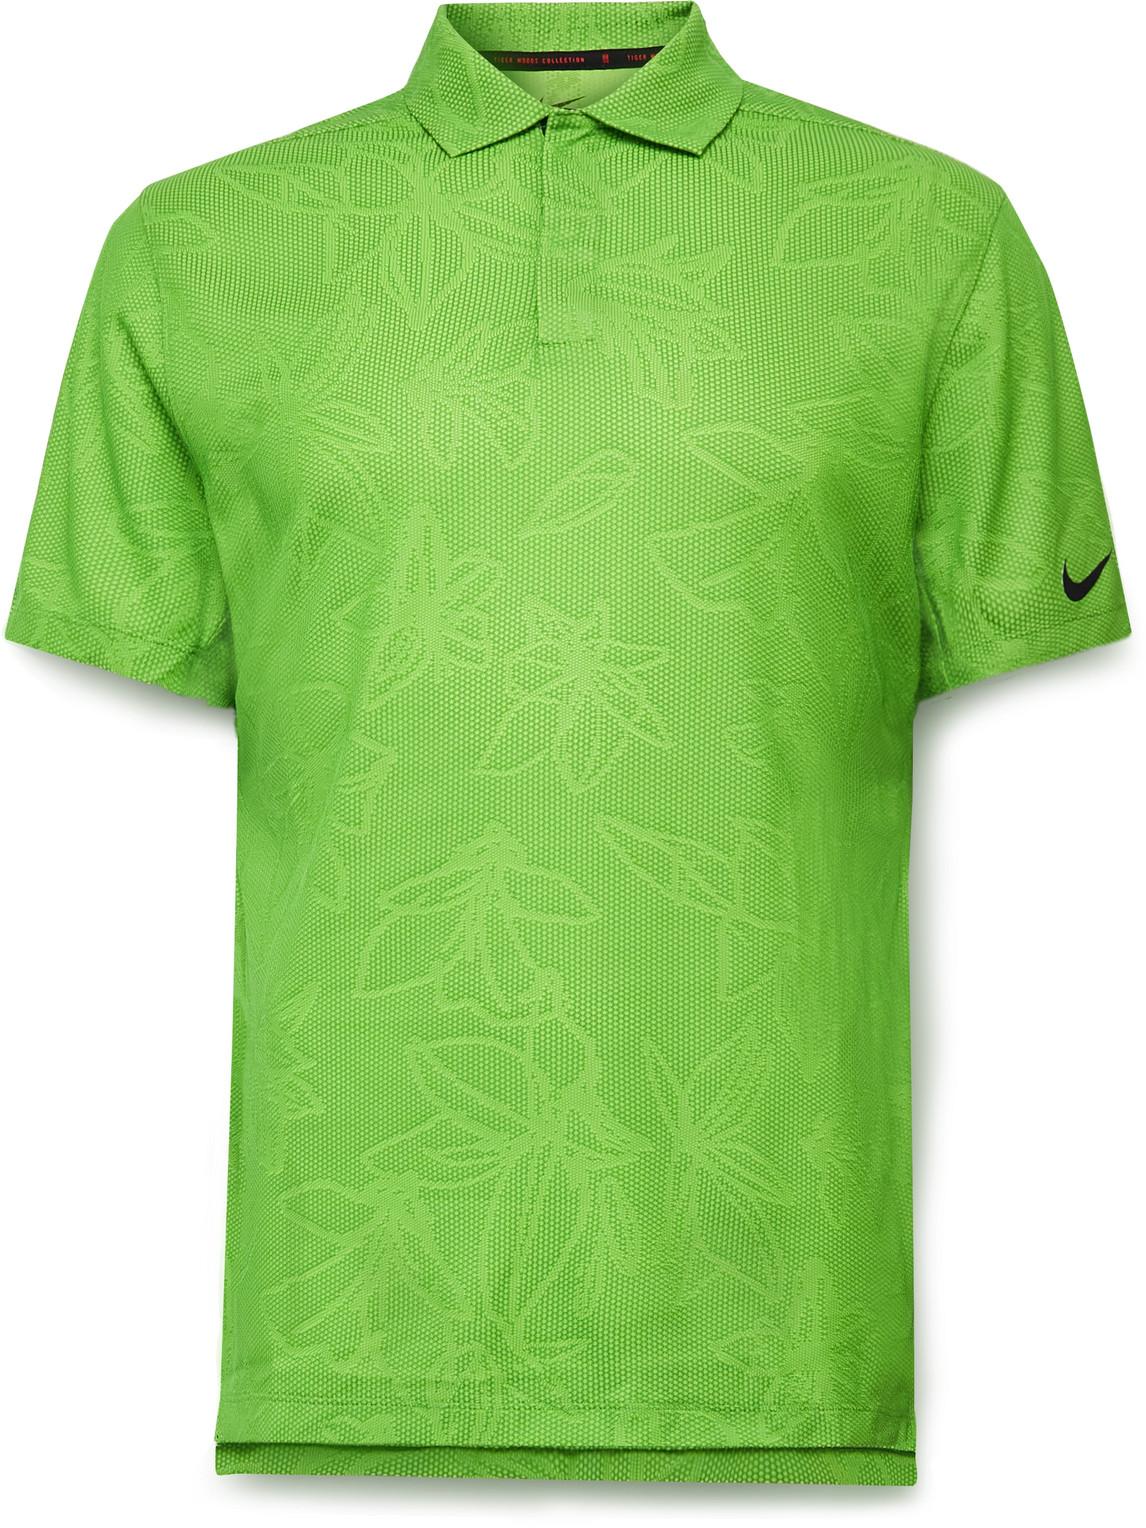 Nike Tiger Woods Floral-jacquard Dri-fit Adv Golf Polo Shirt in Green ...